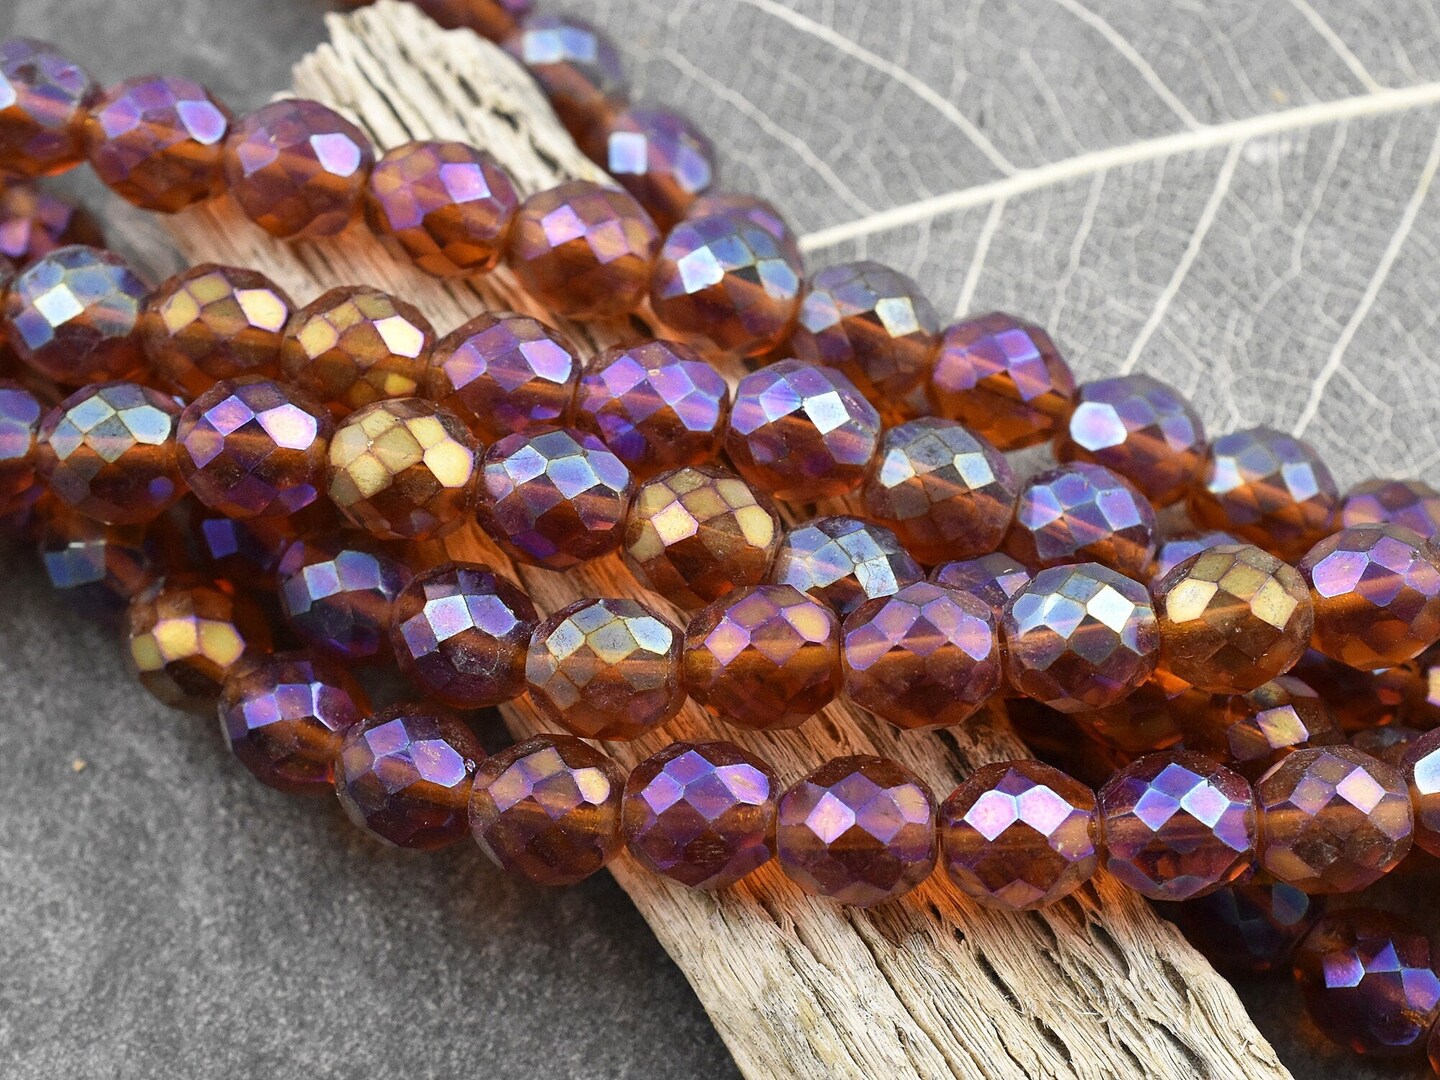 *20* 10mm Amber Topaz AB Fire Polished Round Beads